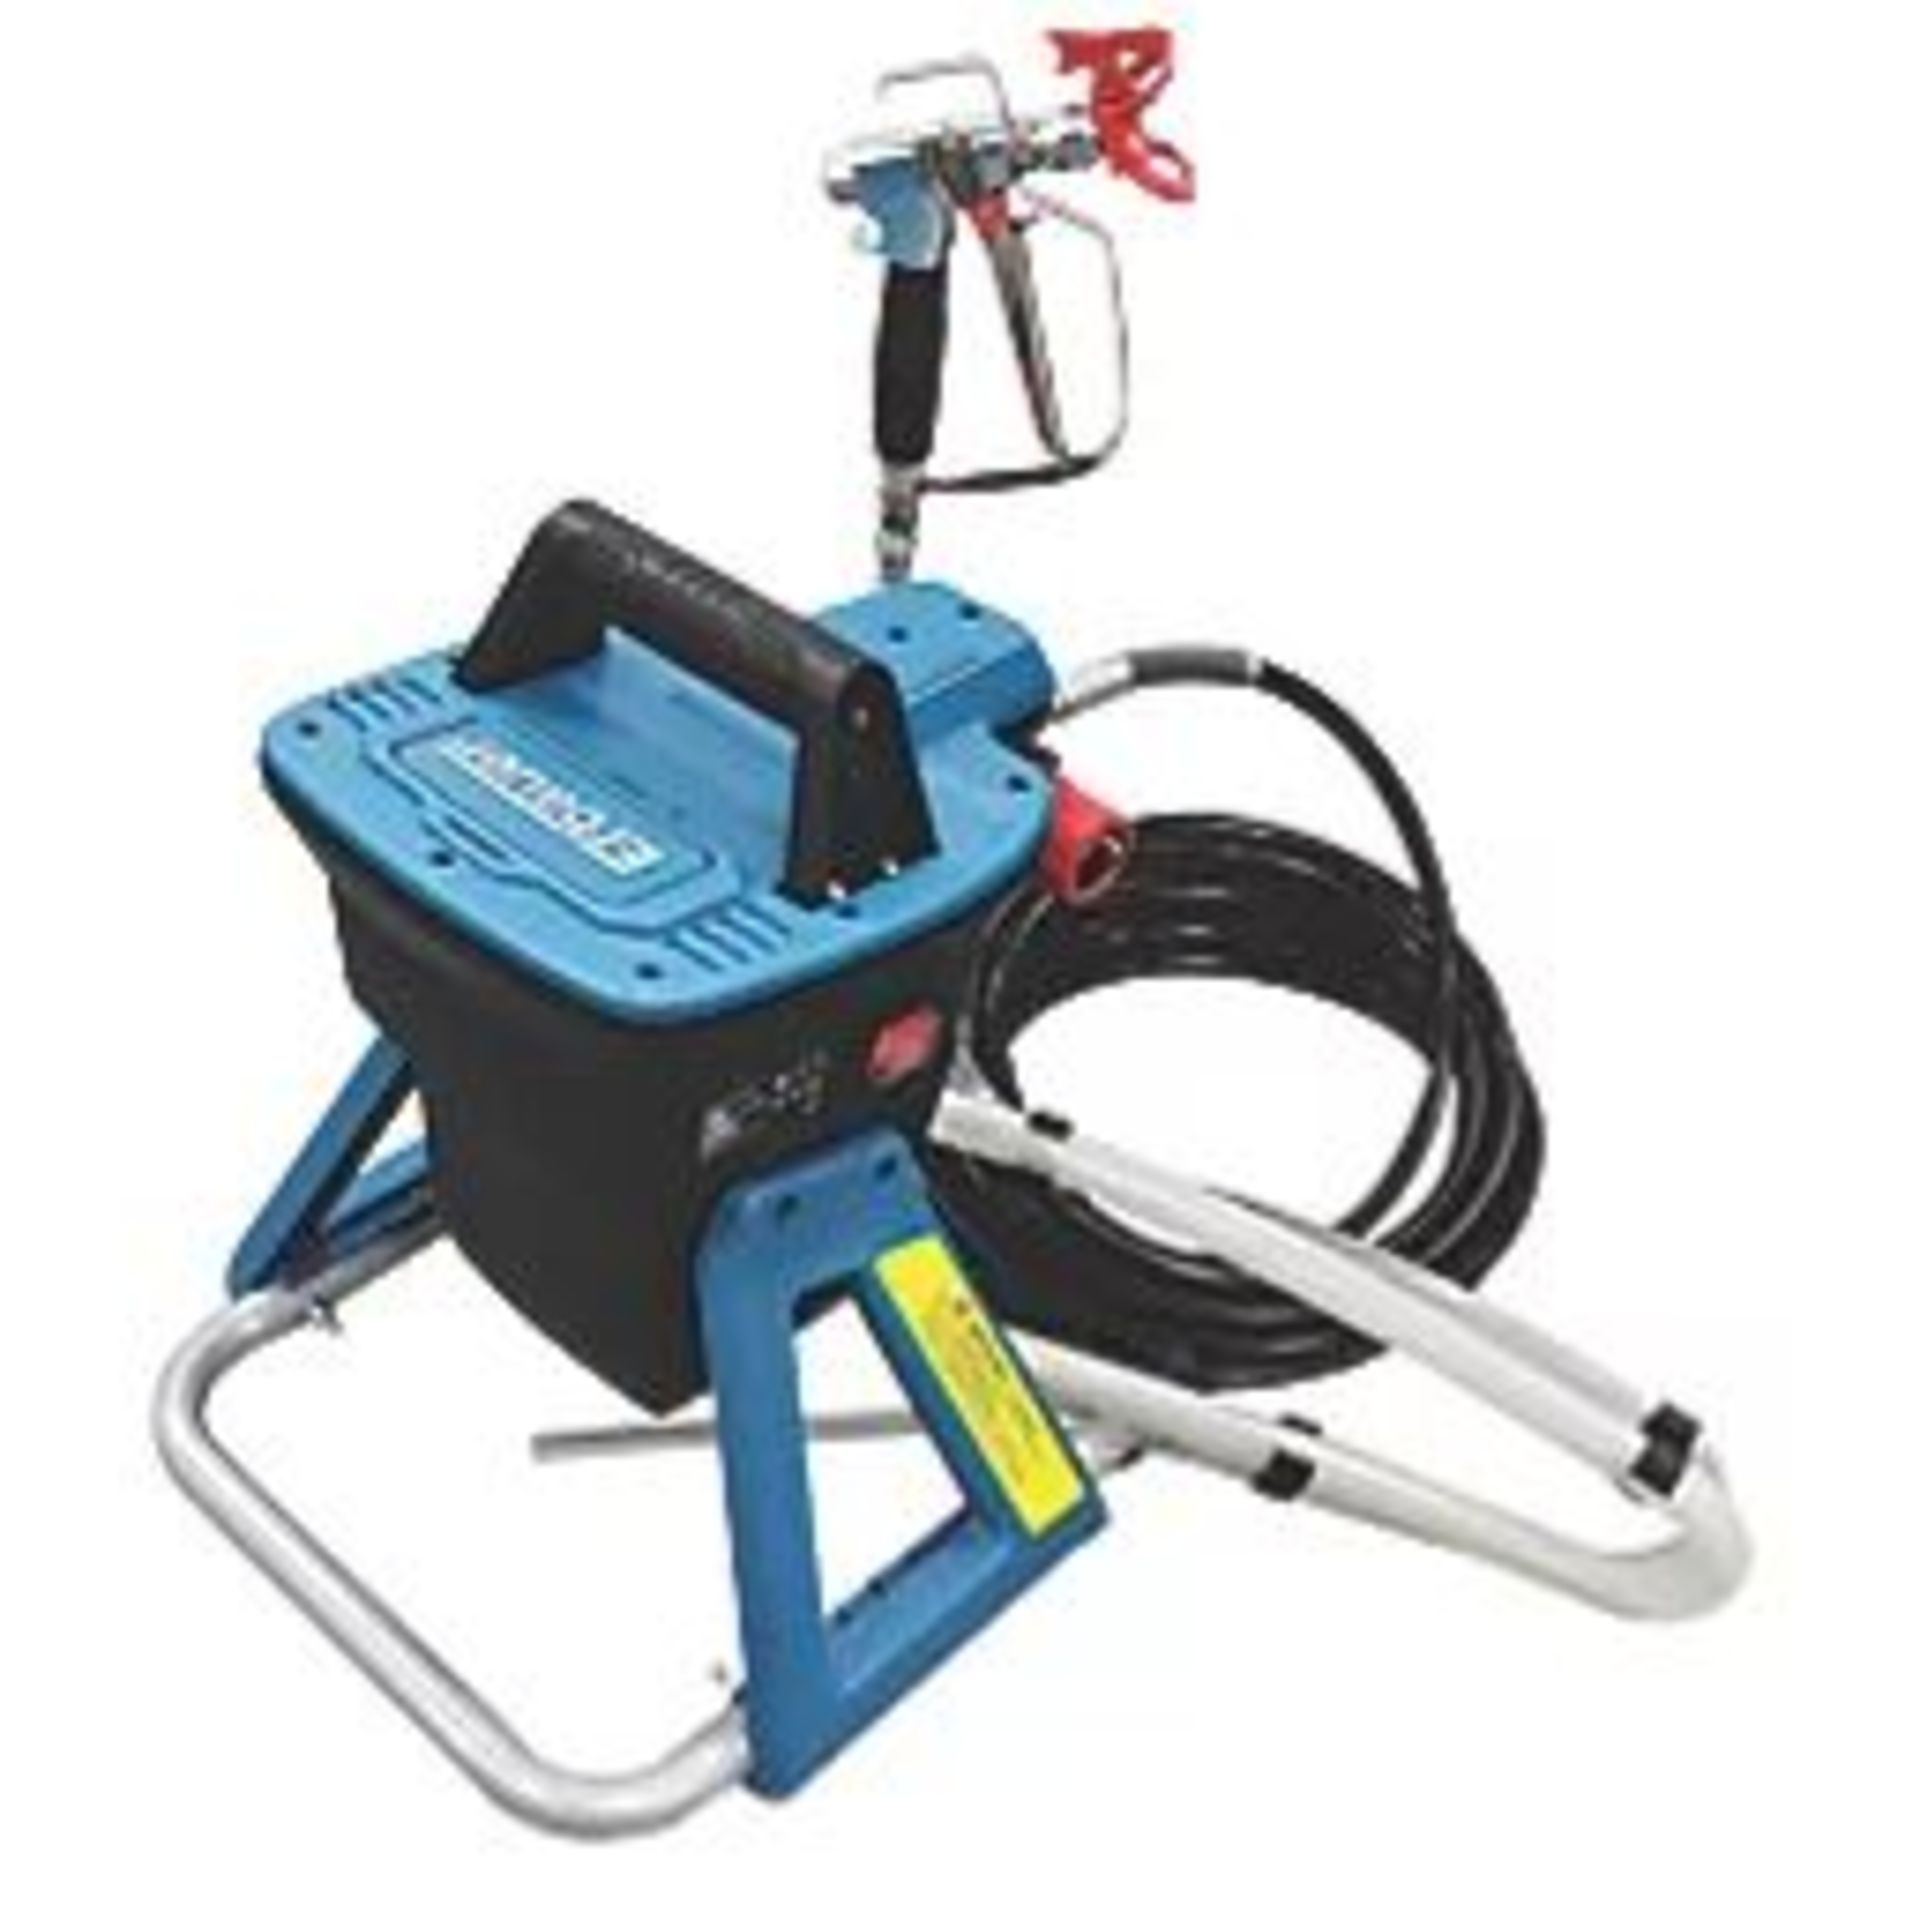 ERBAUER EAPS600 ELECTRIC PAINT SPRAYER 600W. - P4. High efficiency airless paint sprayer for use